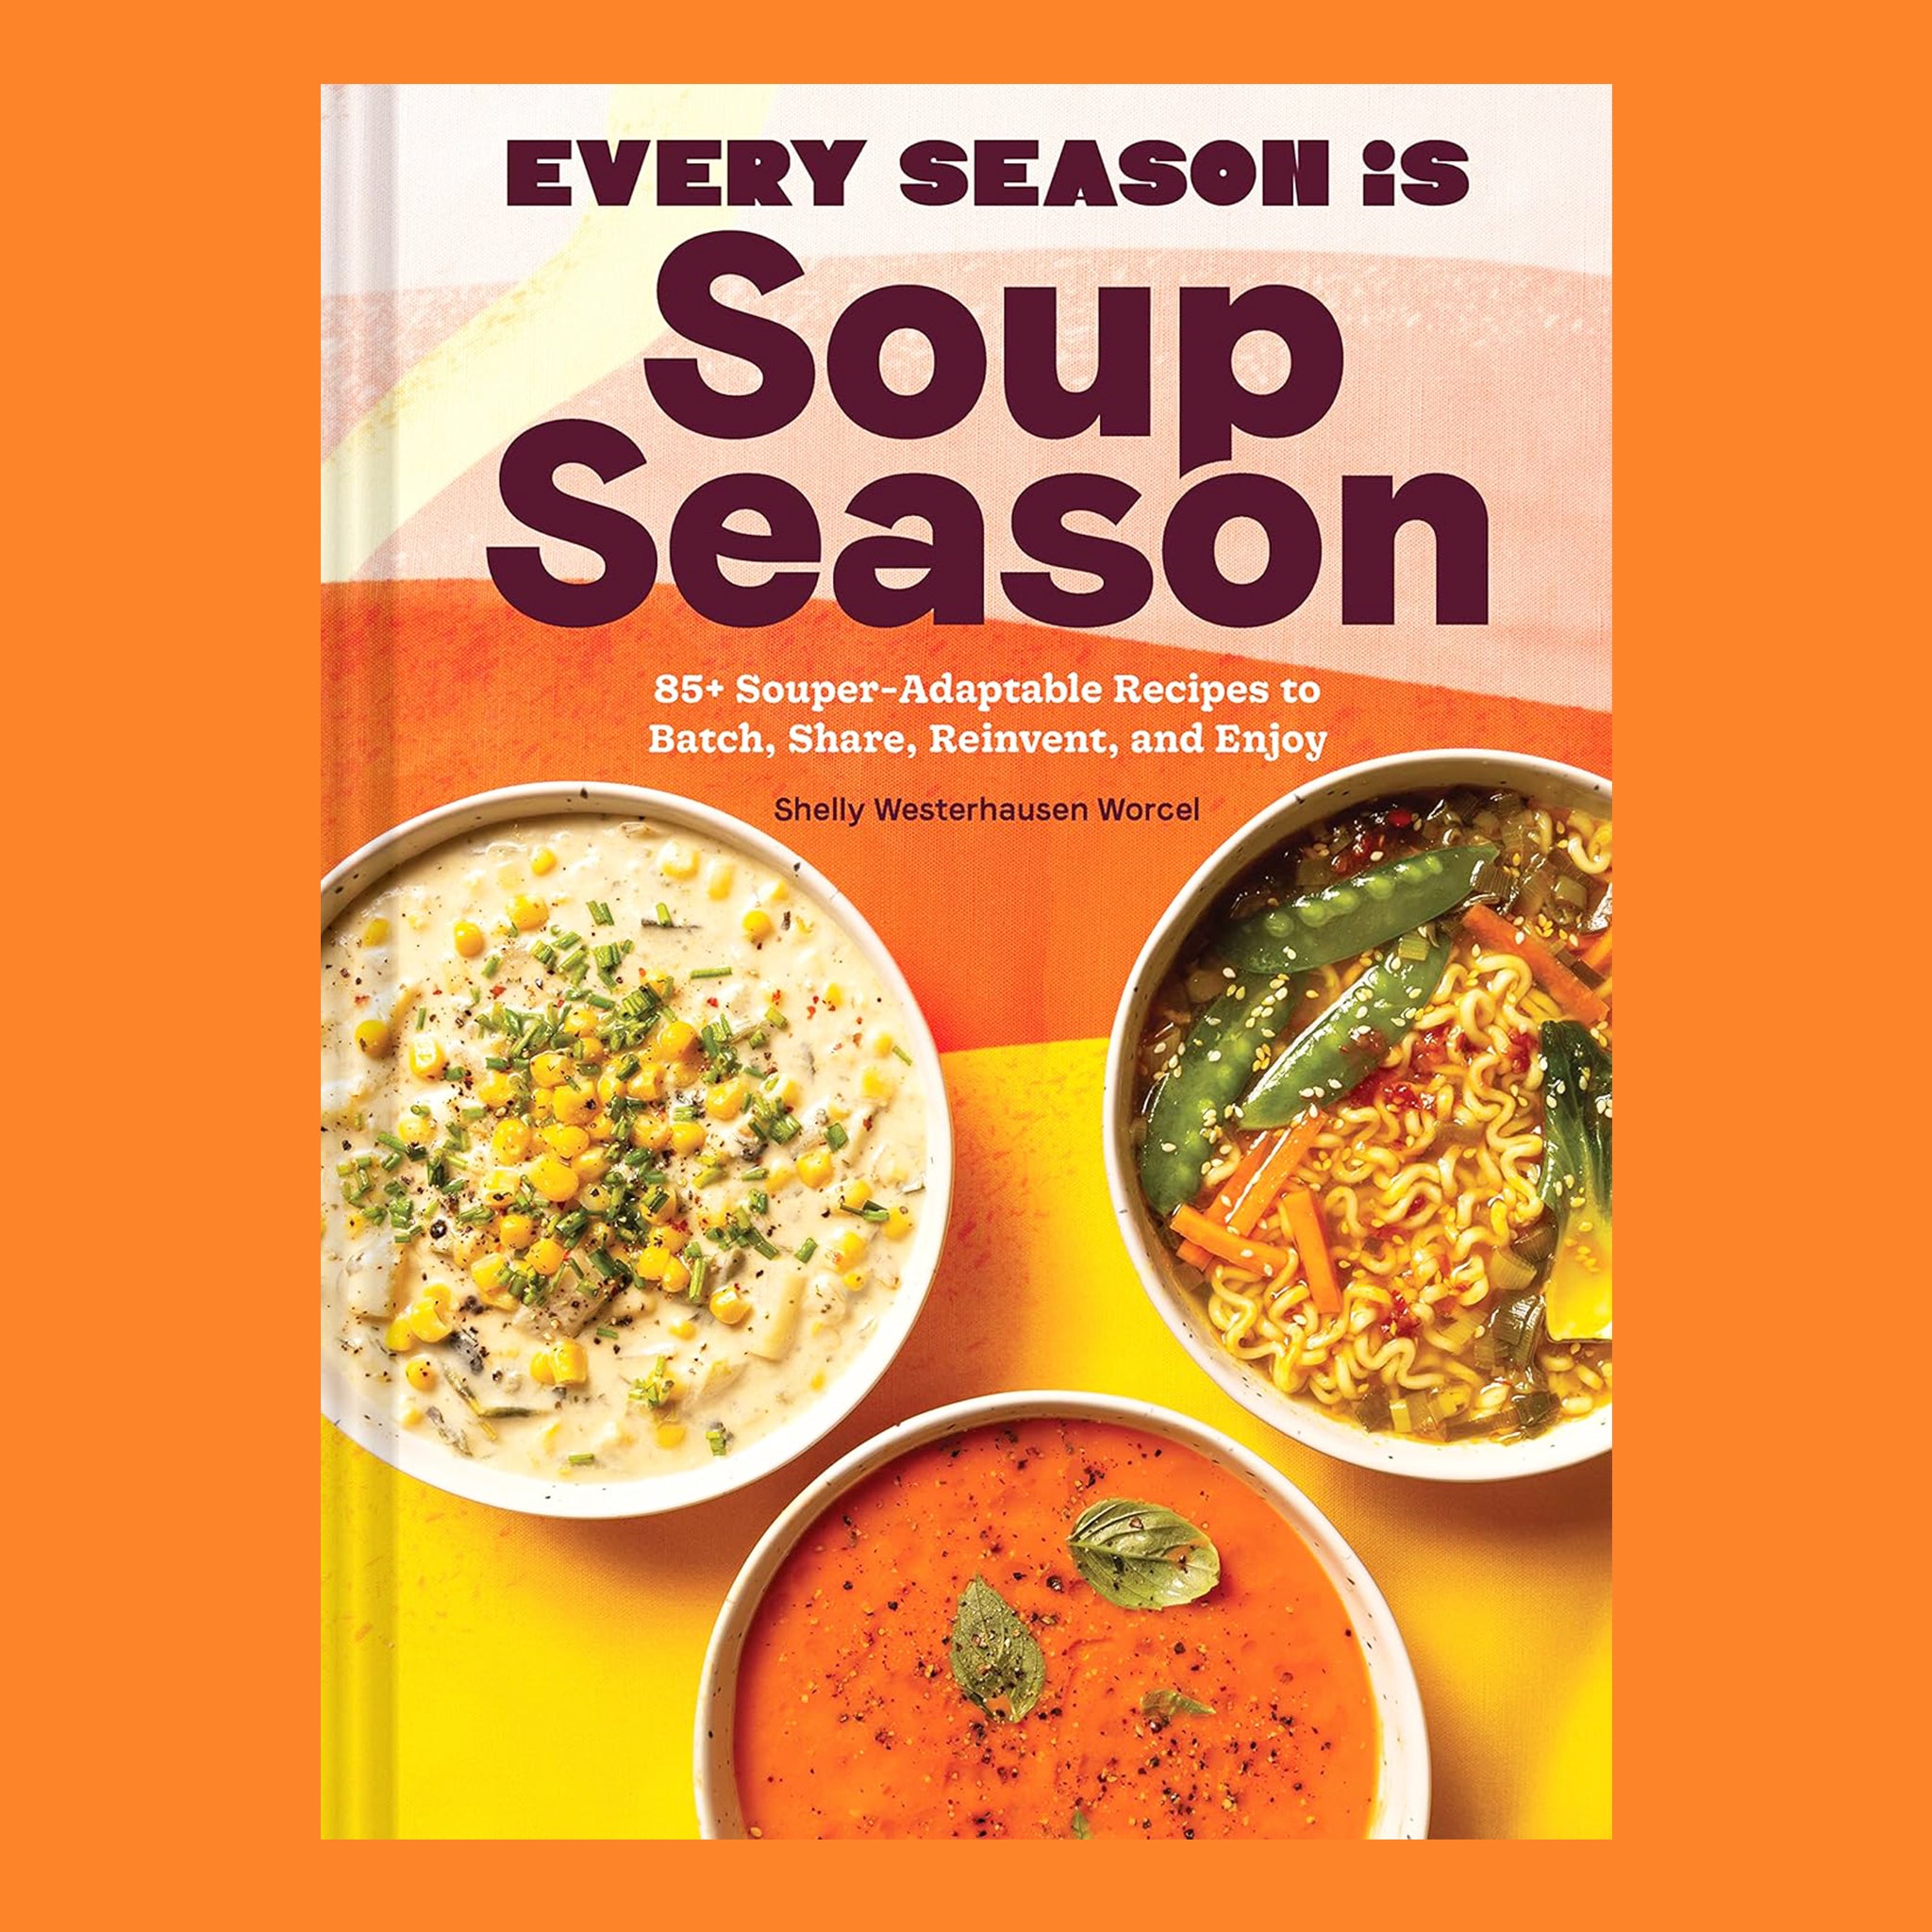 On an orange background is an orange and yellow book cover with three different types of bowls of soup and the title above that reads, "Every Season is Soup Season". 